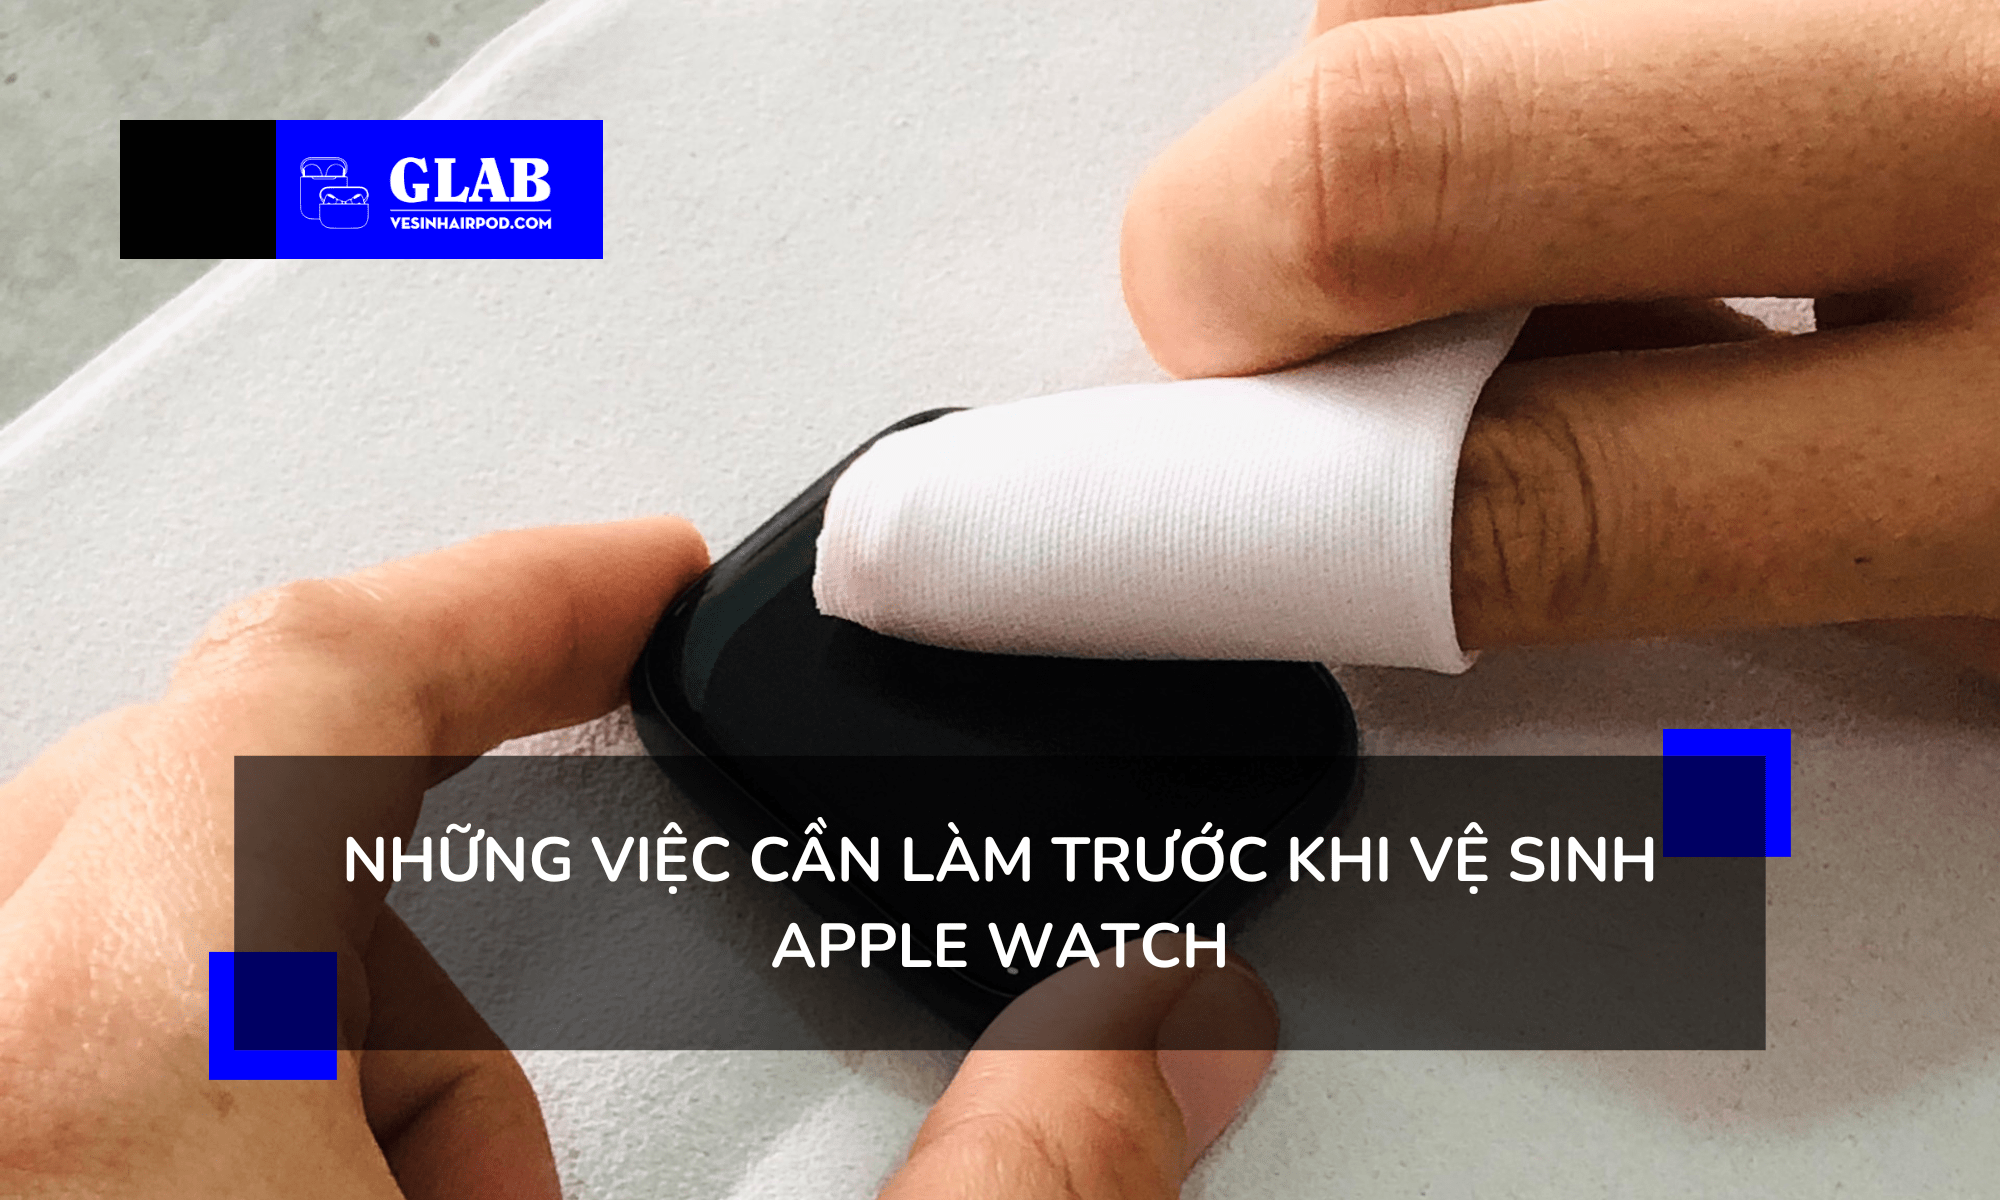 ve-sinh-dong-ho-apple-watch